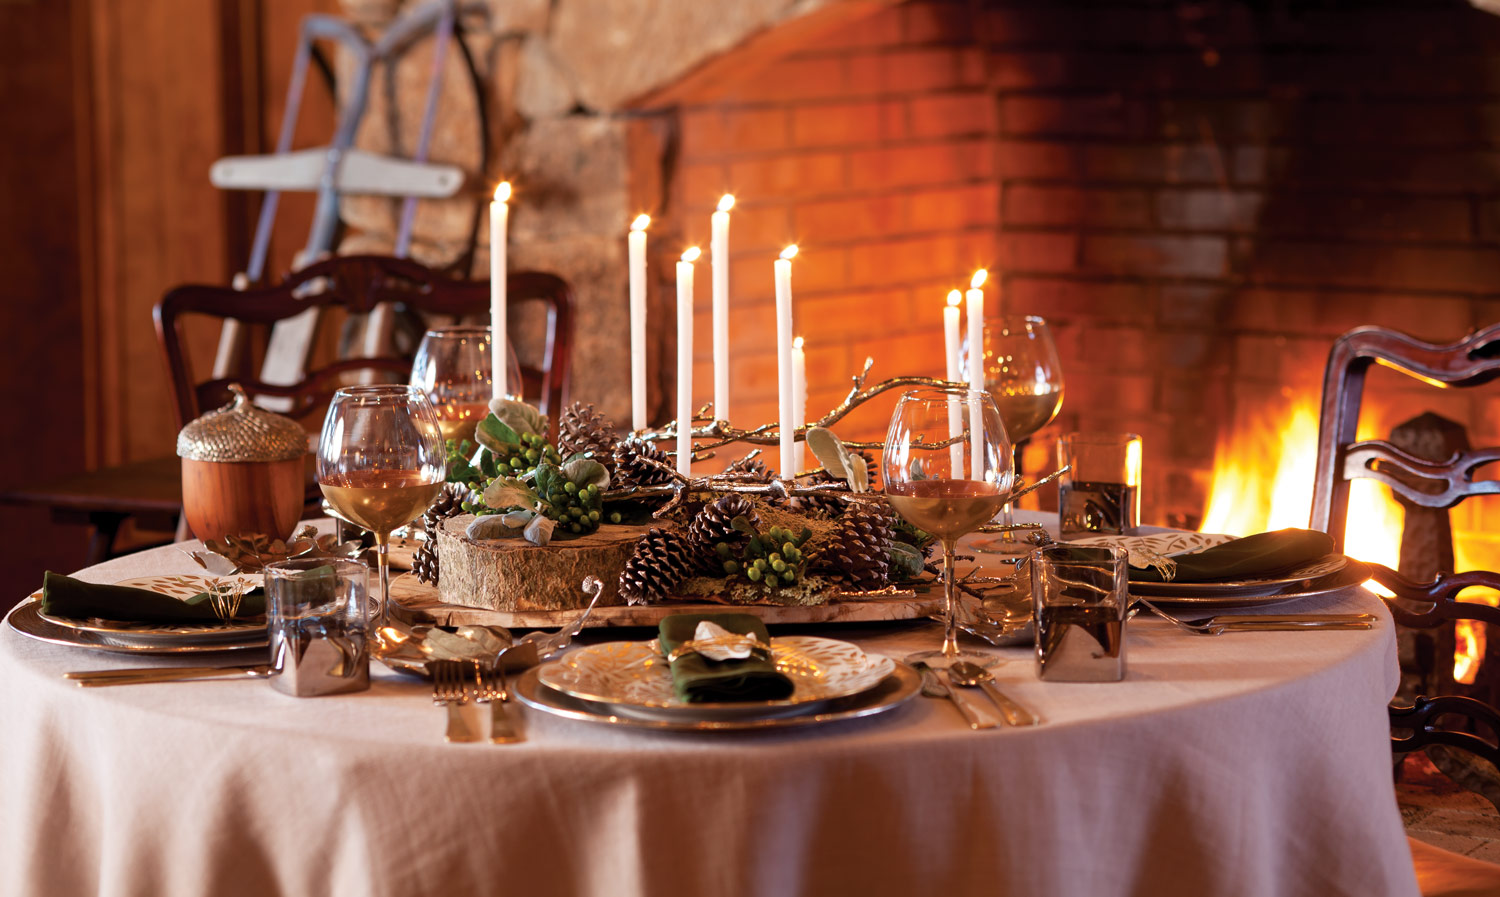 Woodland-Inspired Table Setting